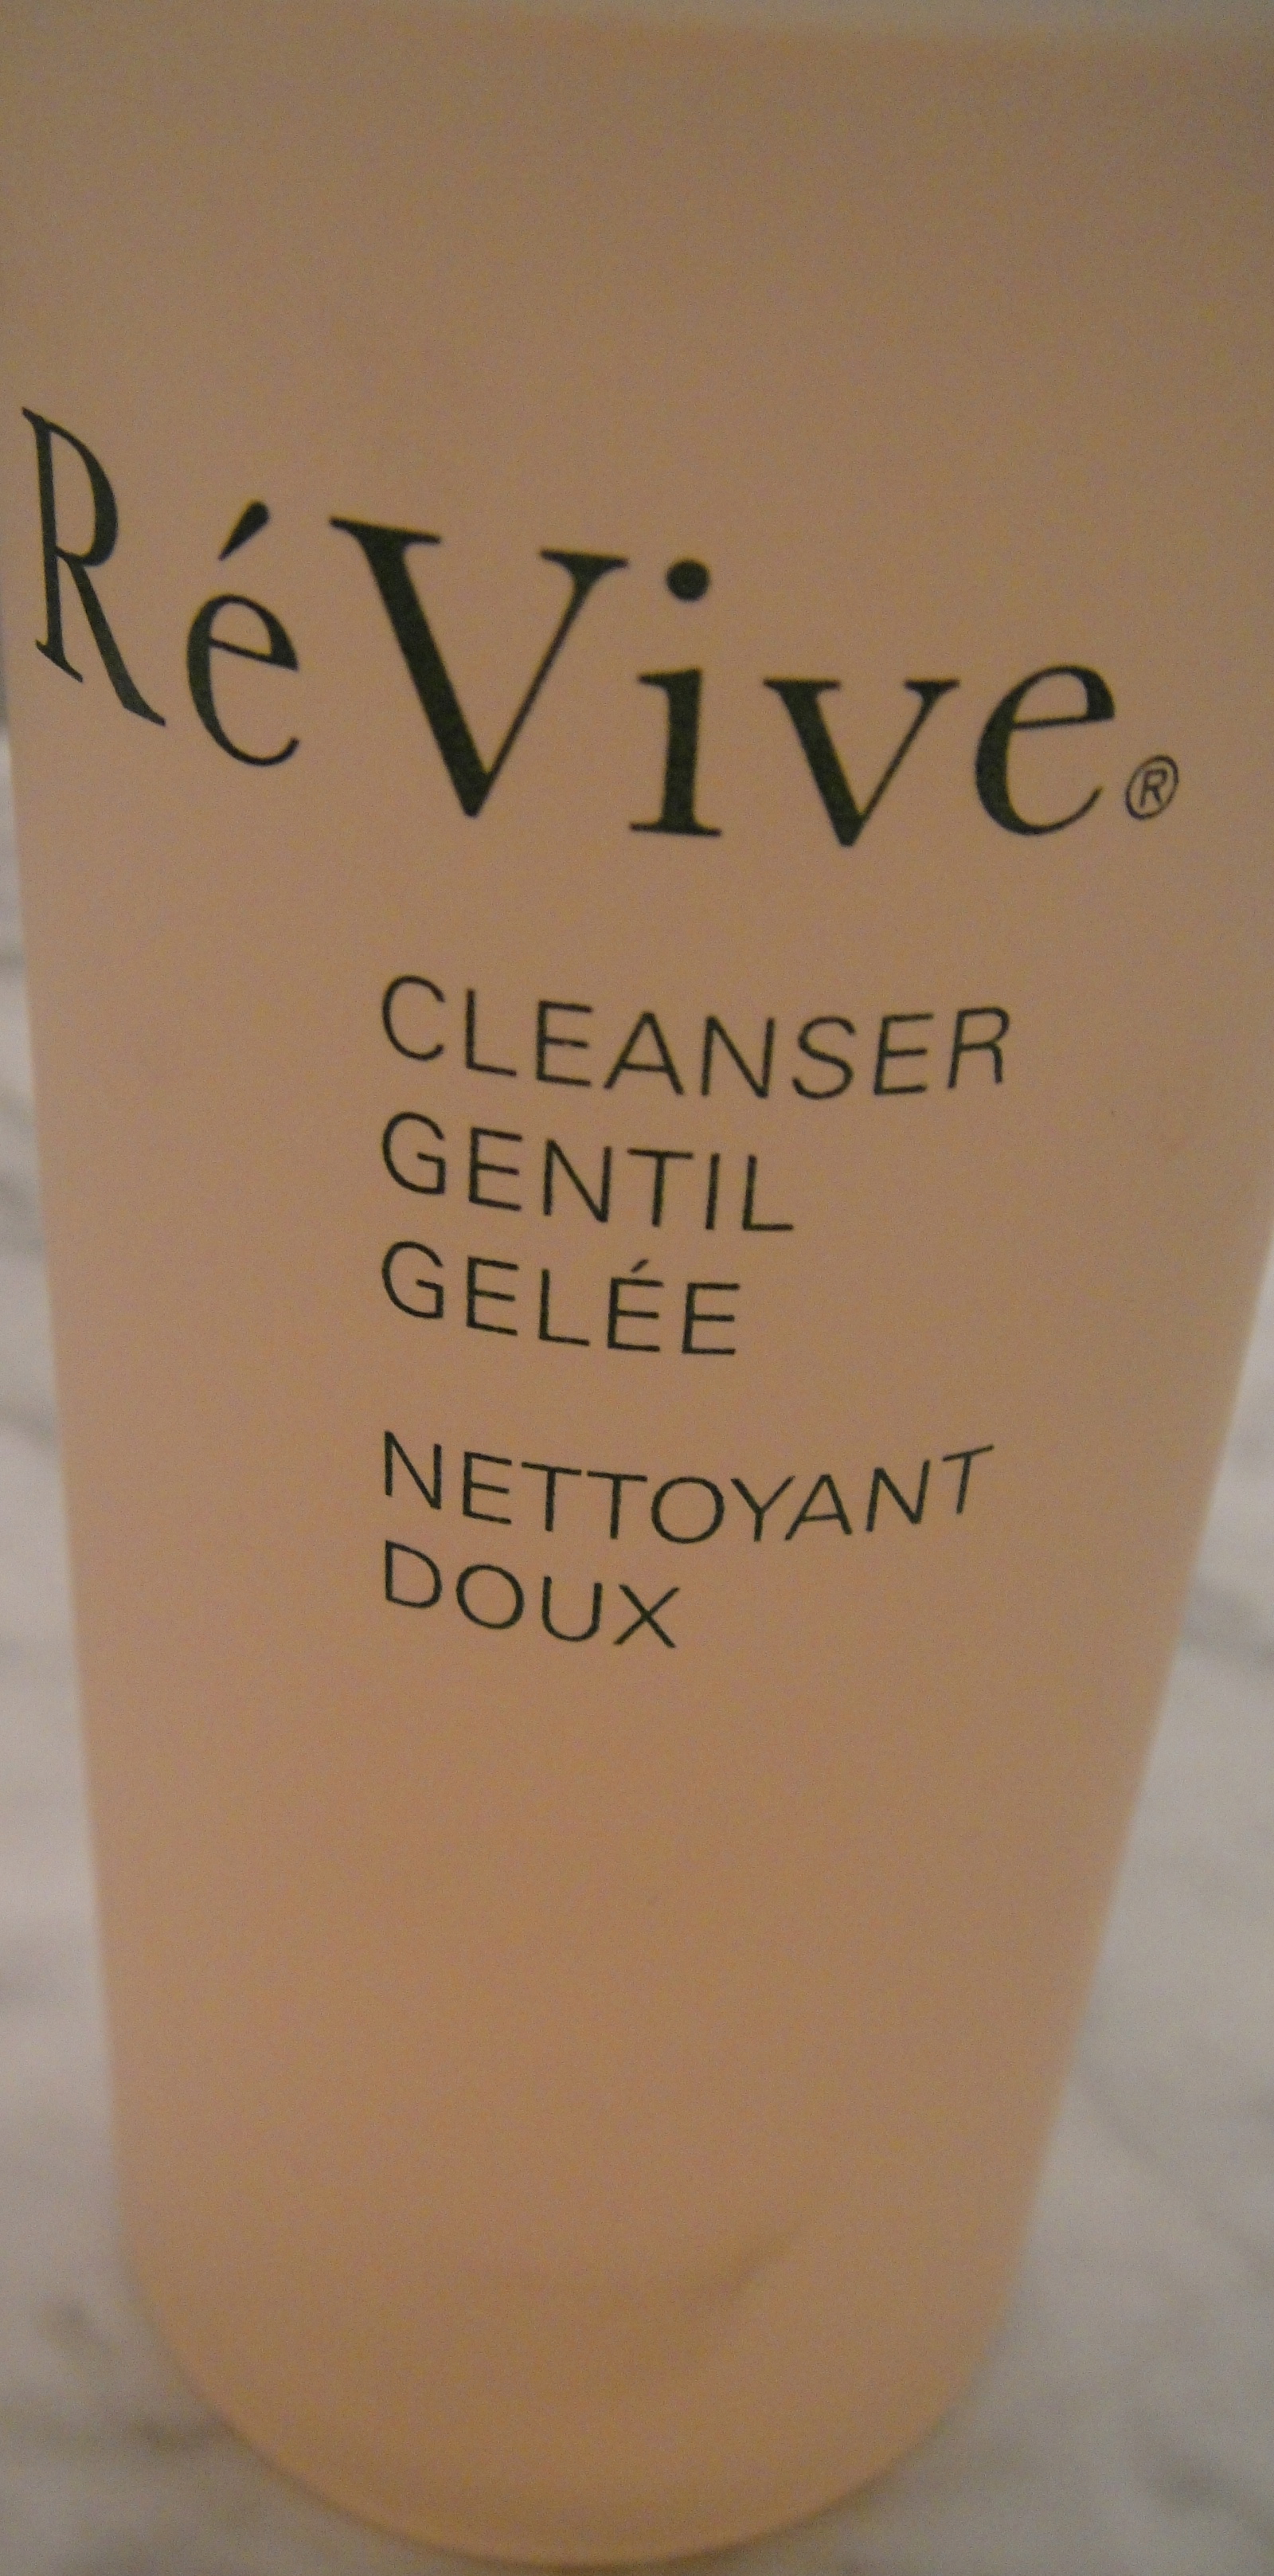 Step 1: Re Vive, Cleanser